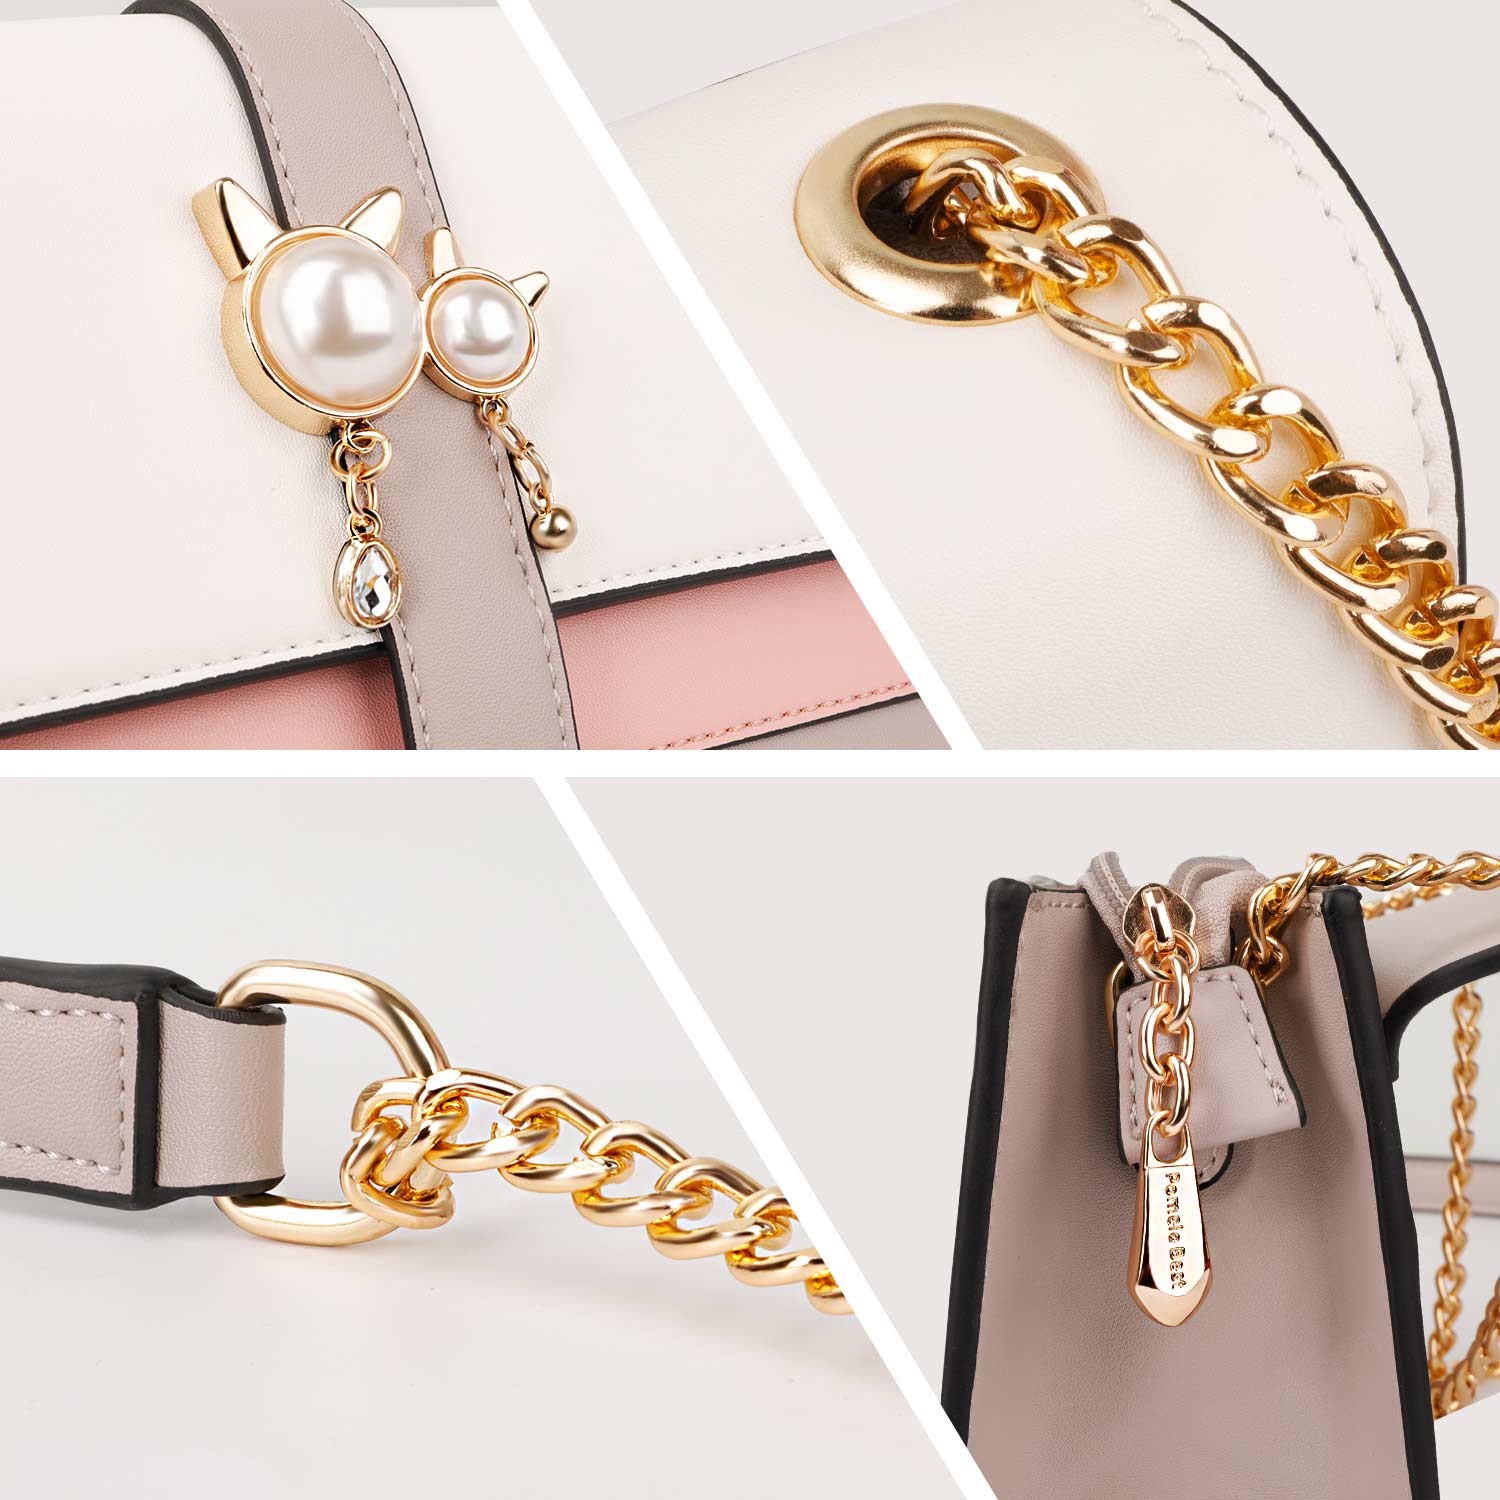 Crossbody Bags for Women with Gold-Tone Metal Chain Strap